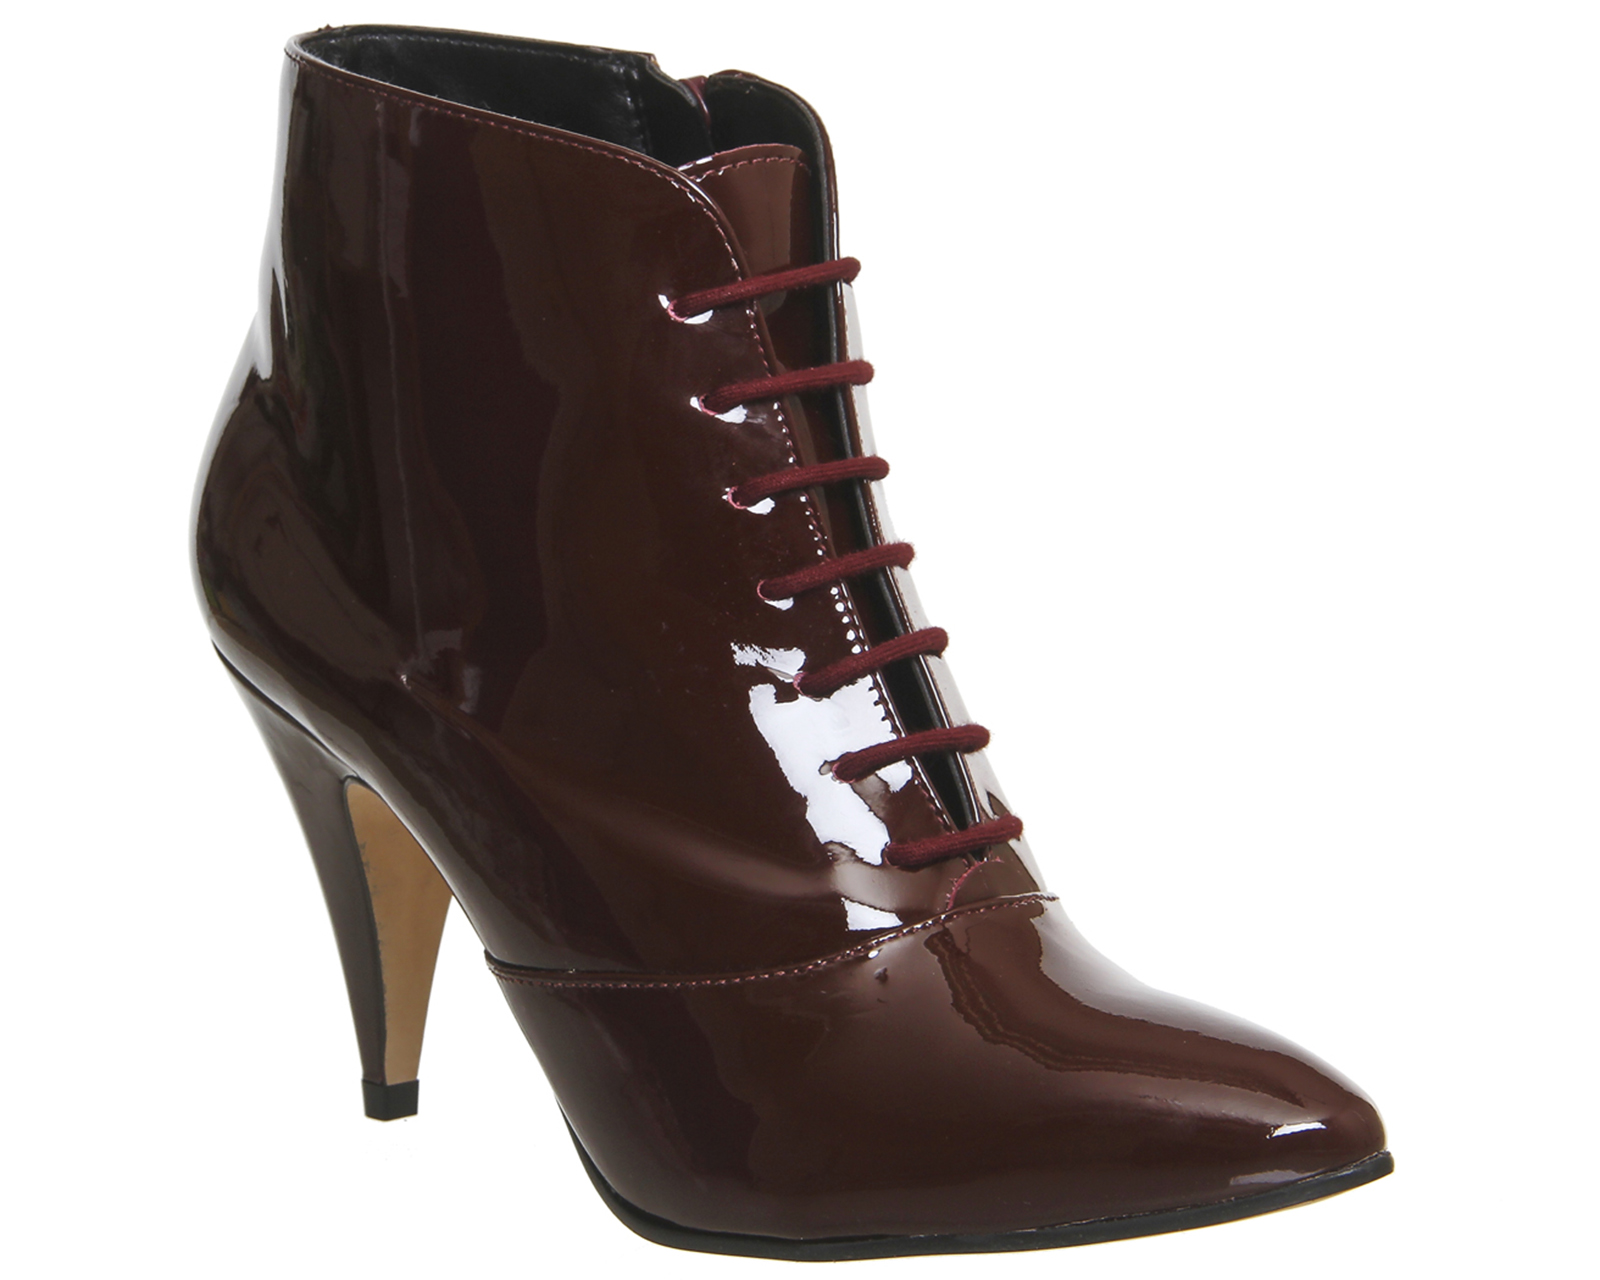 OFFICELauper Lace Up BootsBurgundy Patent